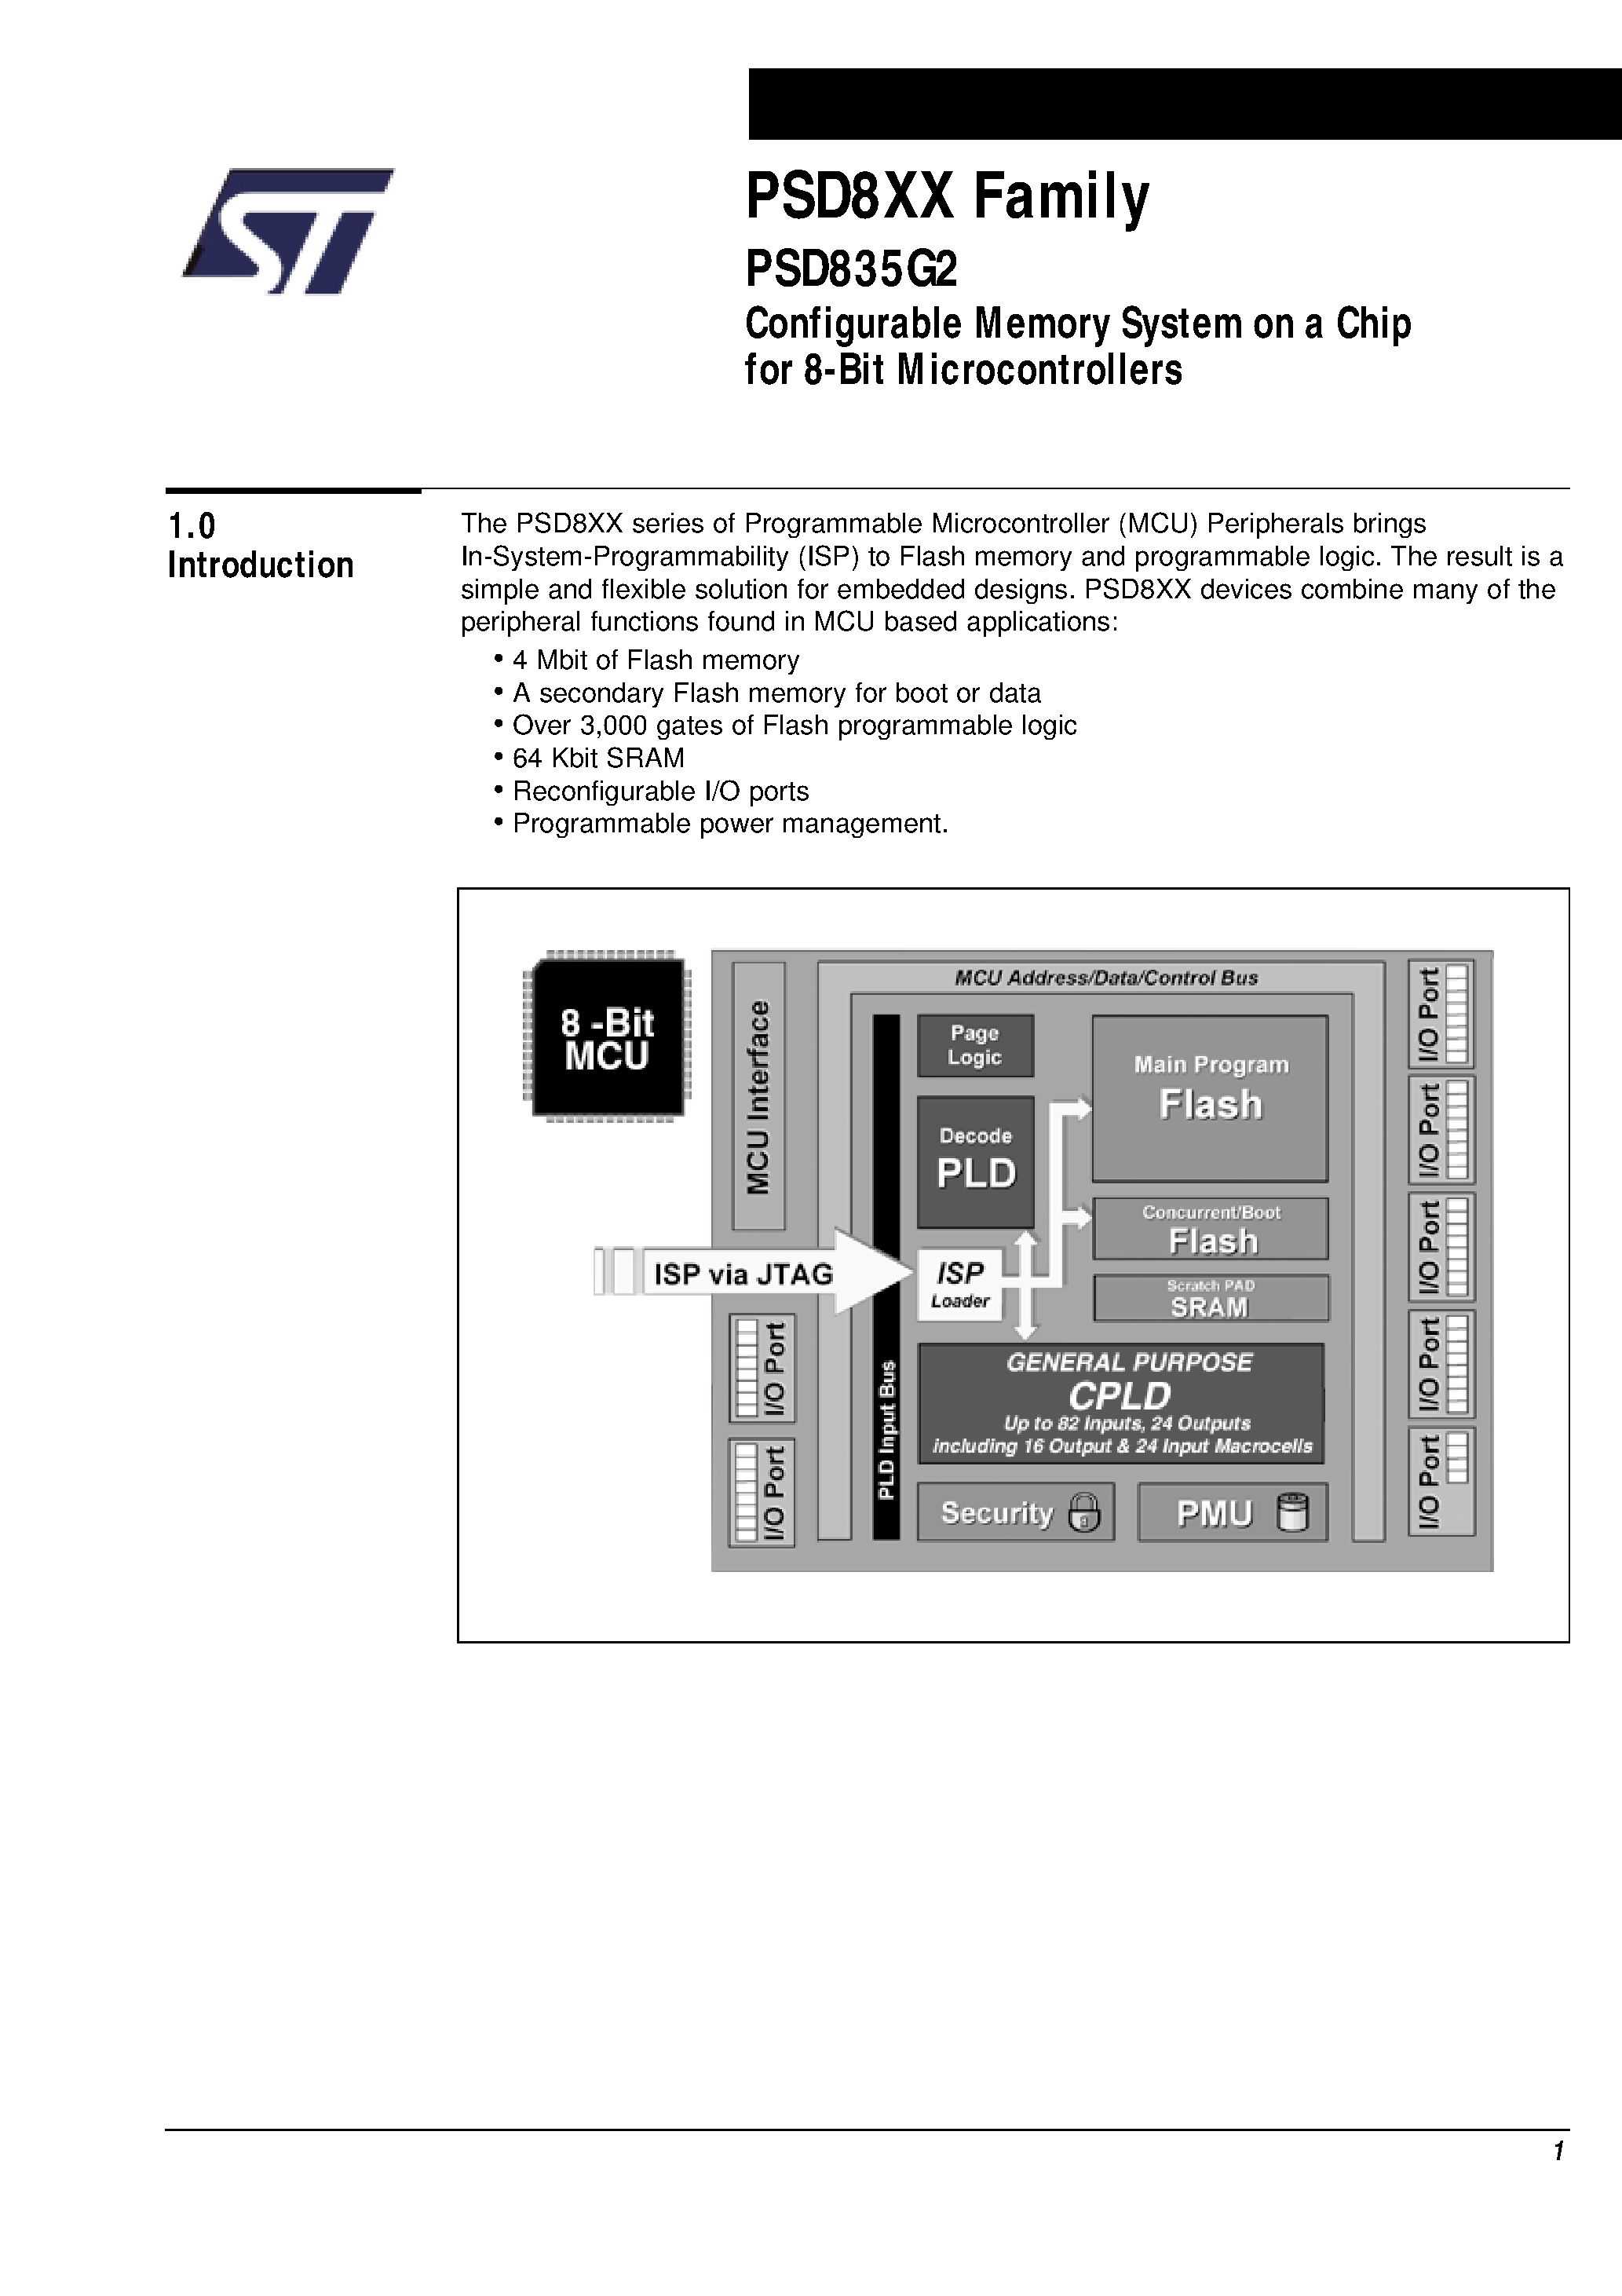 Datasheet PSD835F2V-A-20B81I - Configurable Memory System on a Chip for 8-Bit Microcontrollers page 2